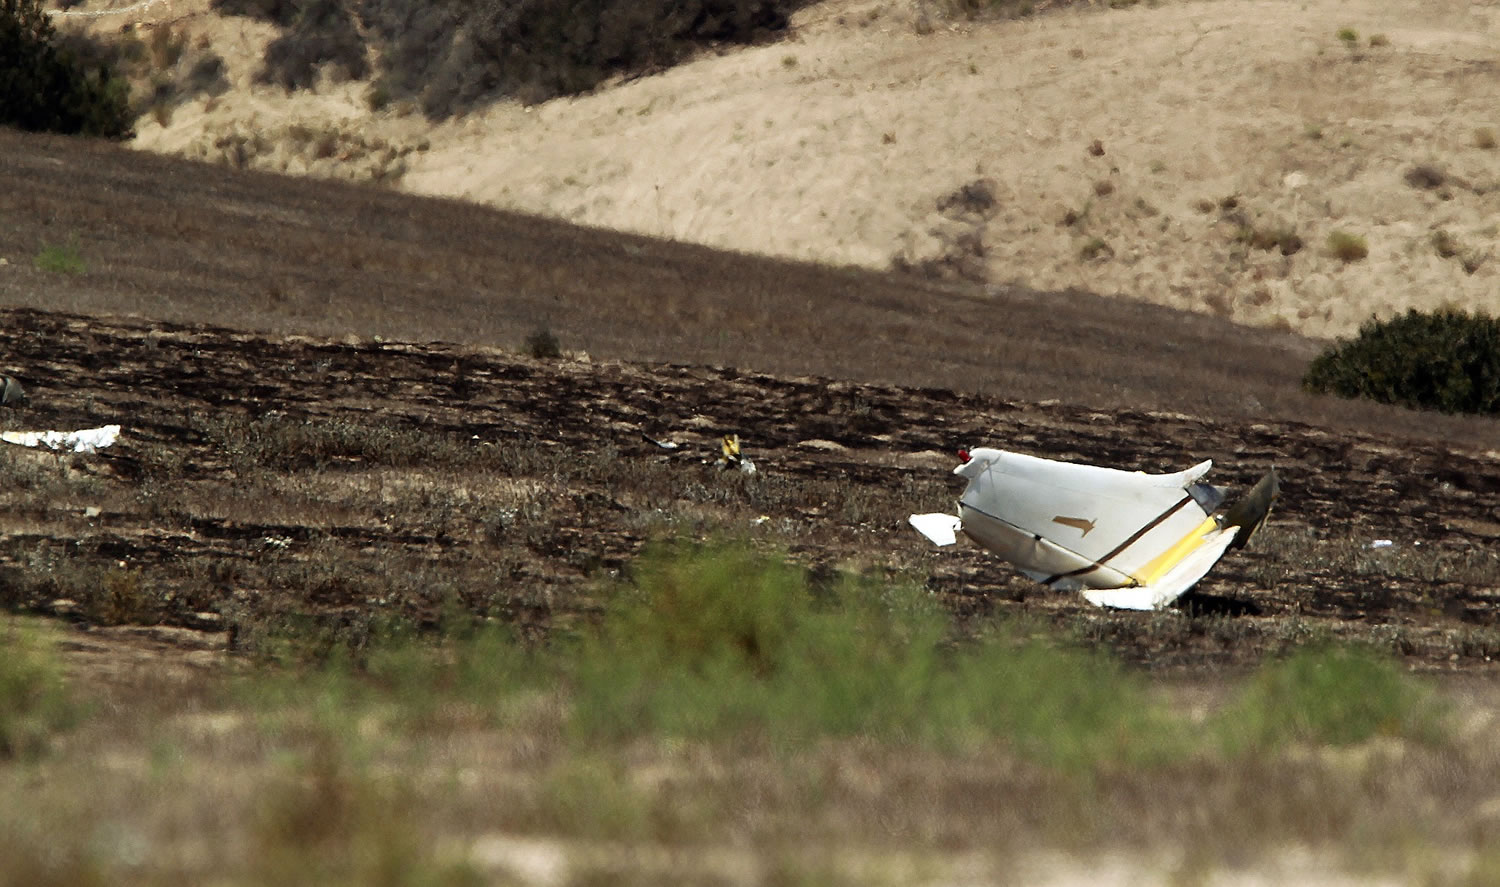 Authorities say multiple people died following the midair collision and crash of two small planes near an airport in southern San Diego County. Federal Aviation Administration spokesman Ian Gregor says the collision occurred around 11 a.m. Sunday, Aug. 16, 2015, about 2 miles northeast of Brown Field Municipal Airport.